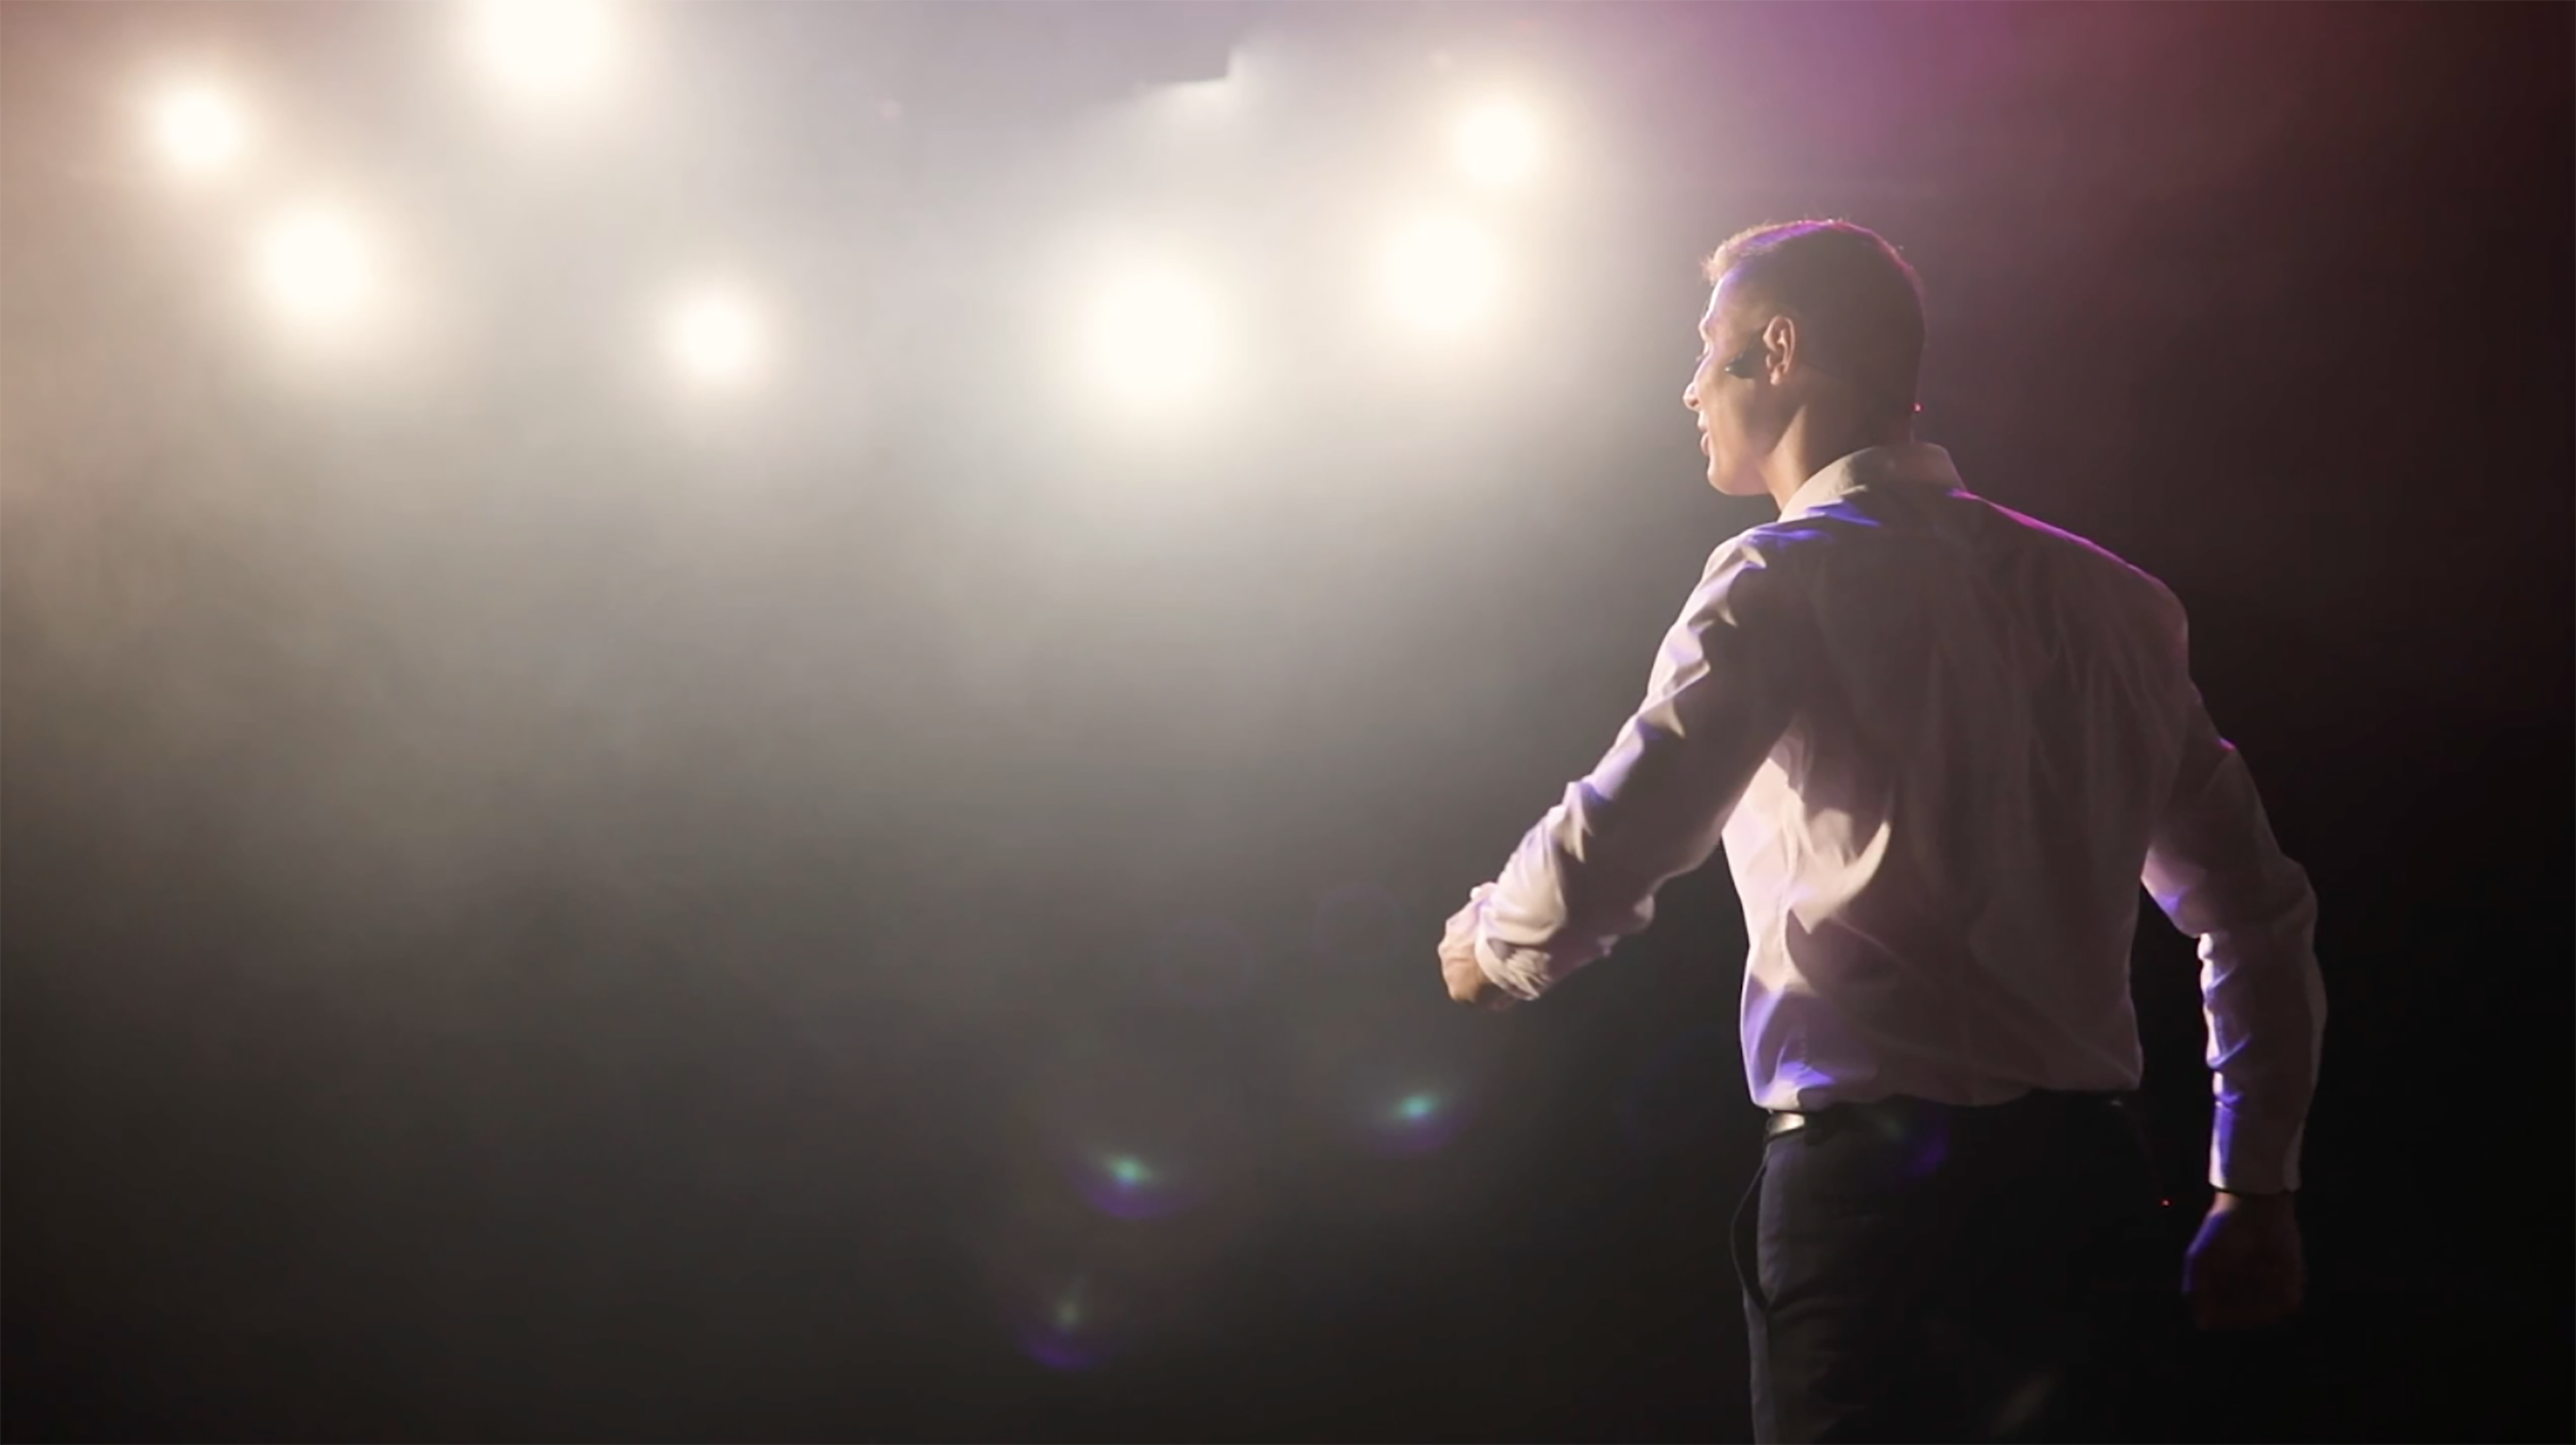 Man standing on stage facing audience under lights.